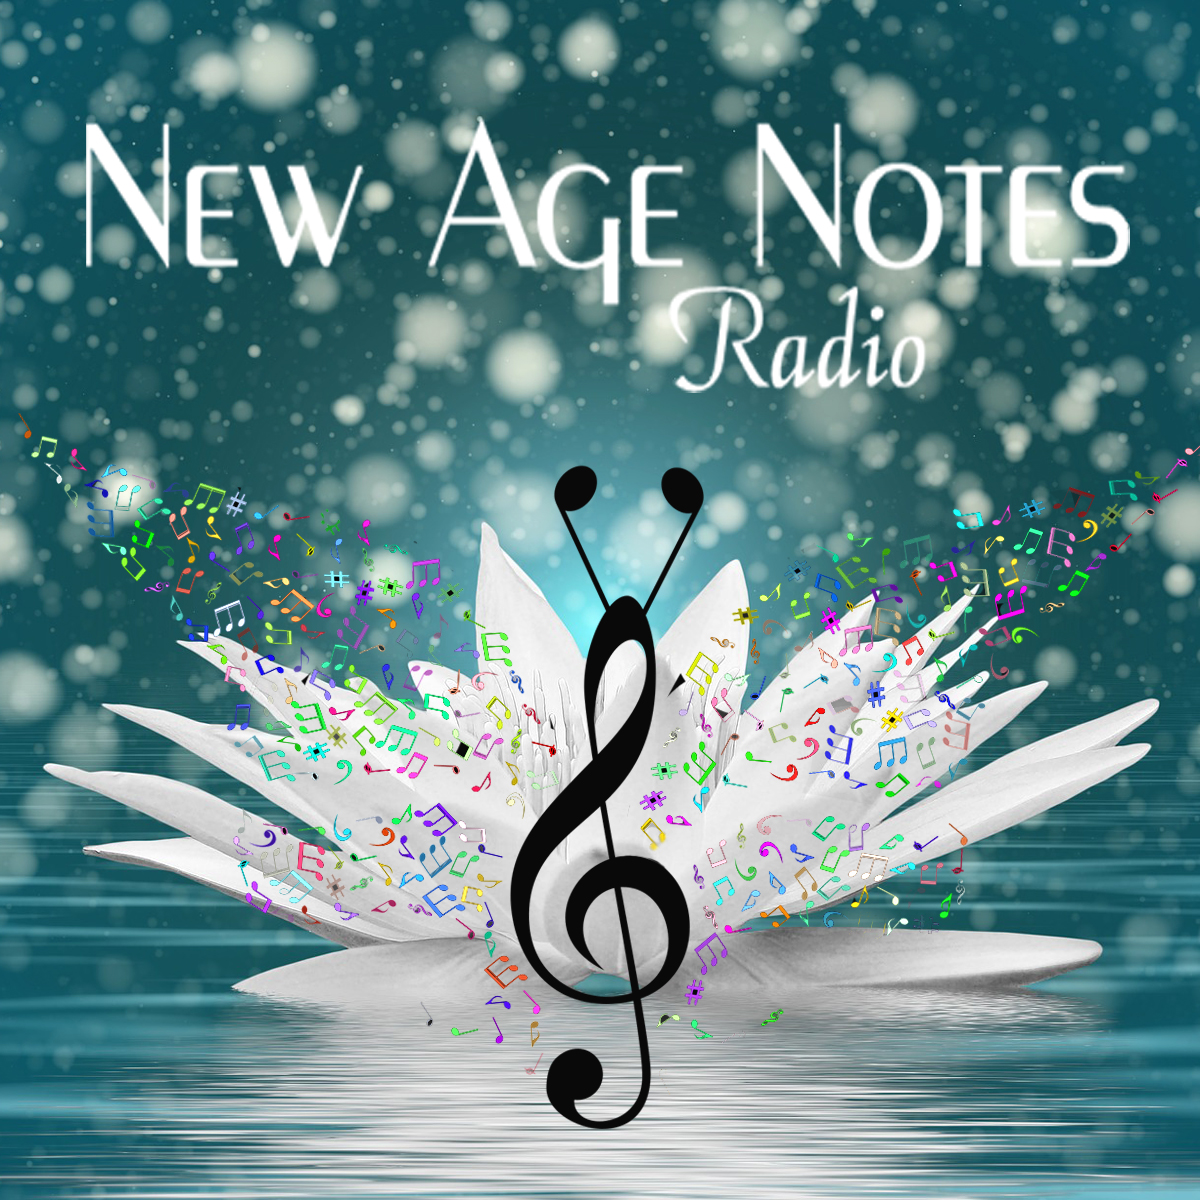 Art for New Age Notes ID #7 - Produced by Louis Anthony deLise by Elena Marino